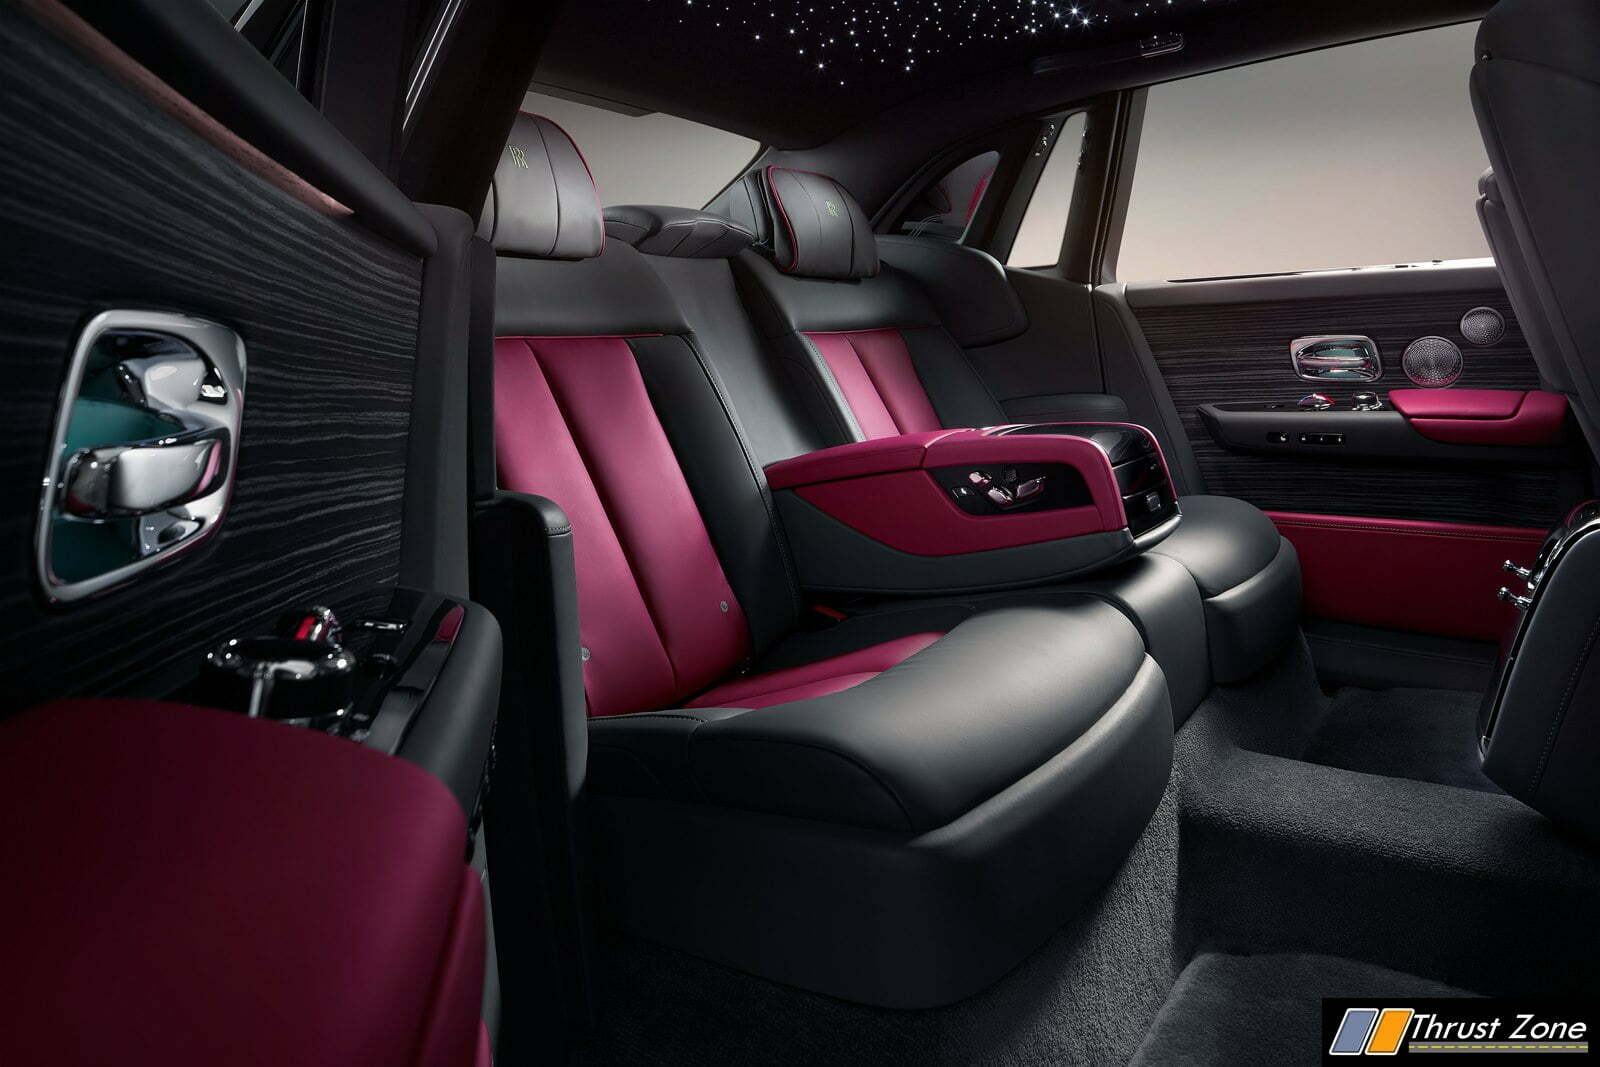 2022 Rolls Royce Phantom Updated Inside and Outside With Subtle Changes (5)